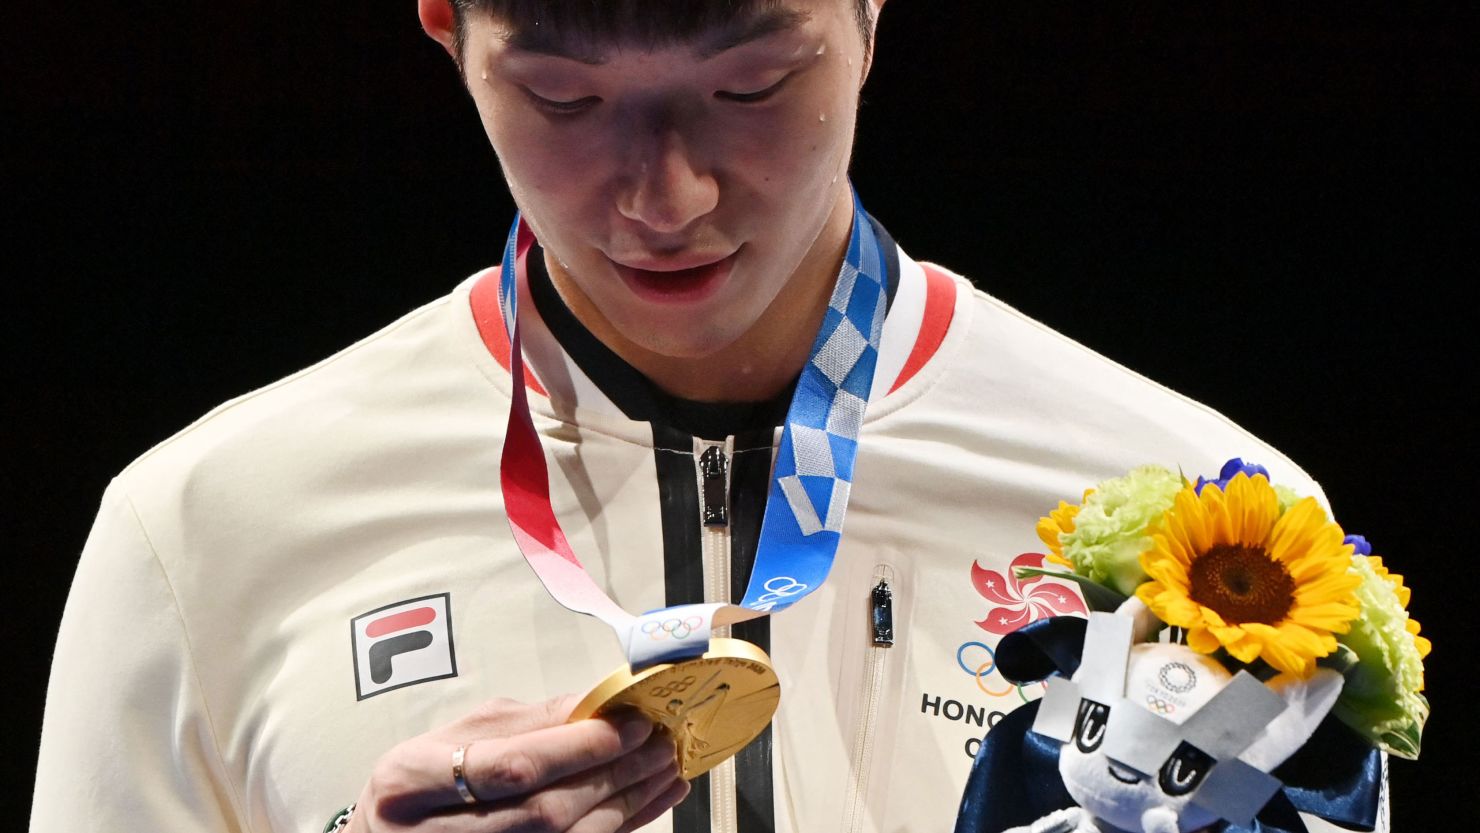 Fencing gold medallist Cheung Ka Long of Hong Kong looks at his medal while on the podium during the medal ceremony for the Men's Individual Foil during the Tokyo 2020 Olympic Games at the Makuhari Messe Hall in Chiba City, Chiba Prefecture, Japan, on July 26, 2021. 